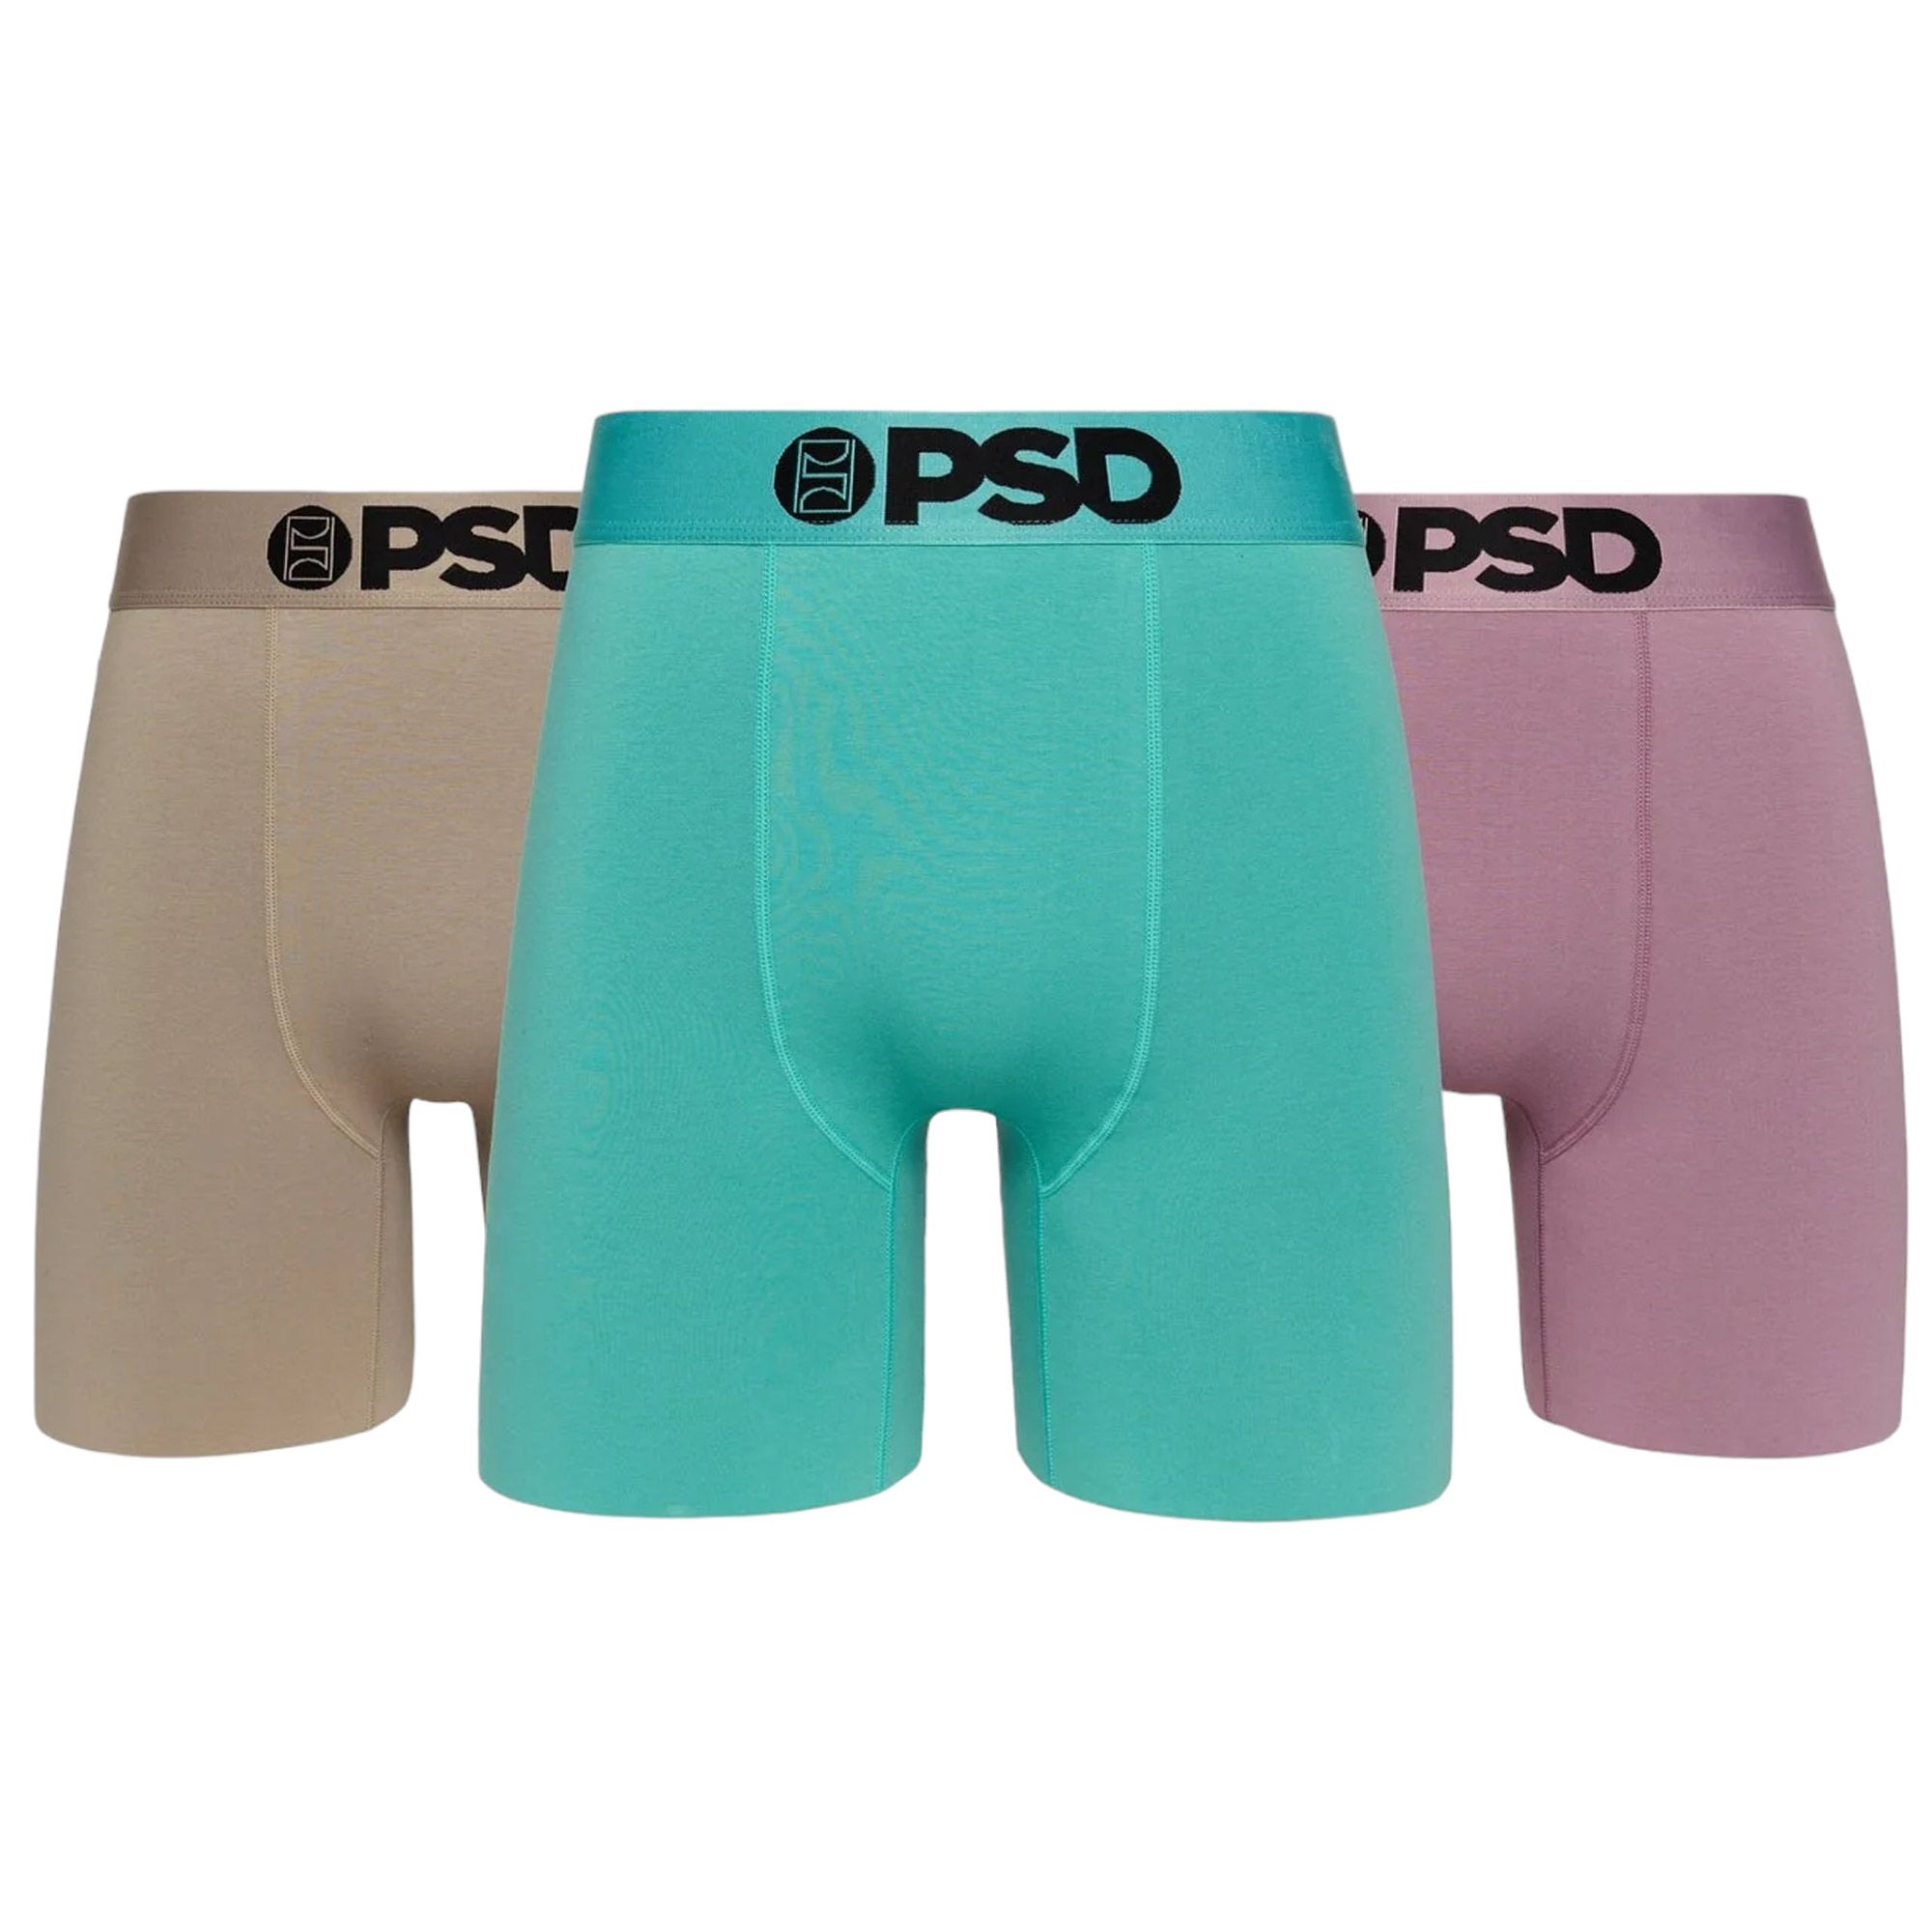 Psdunderwear: The Secret to Stylish and Supportive Undergarments